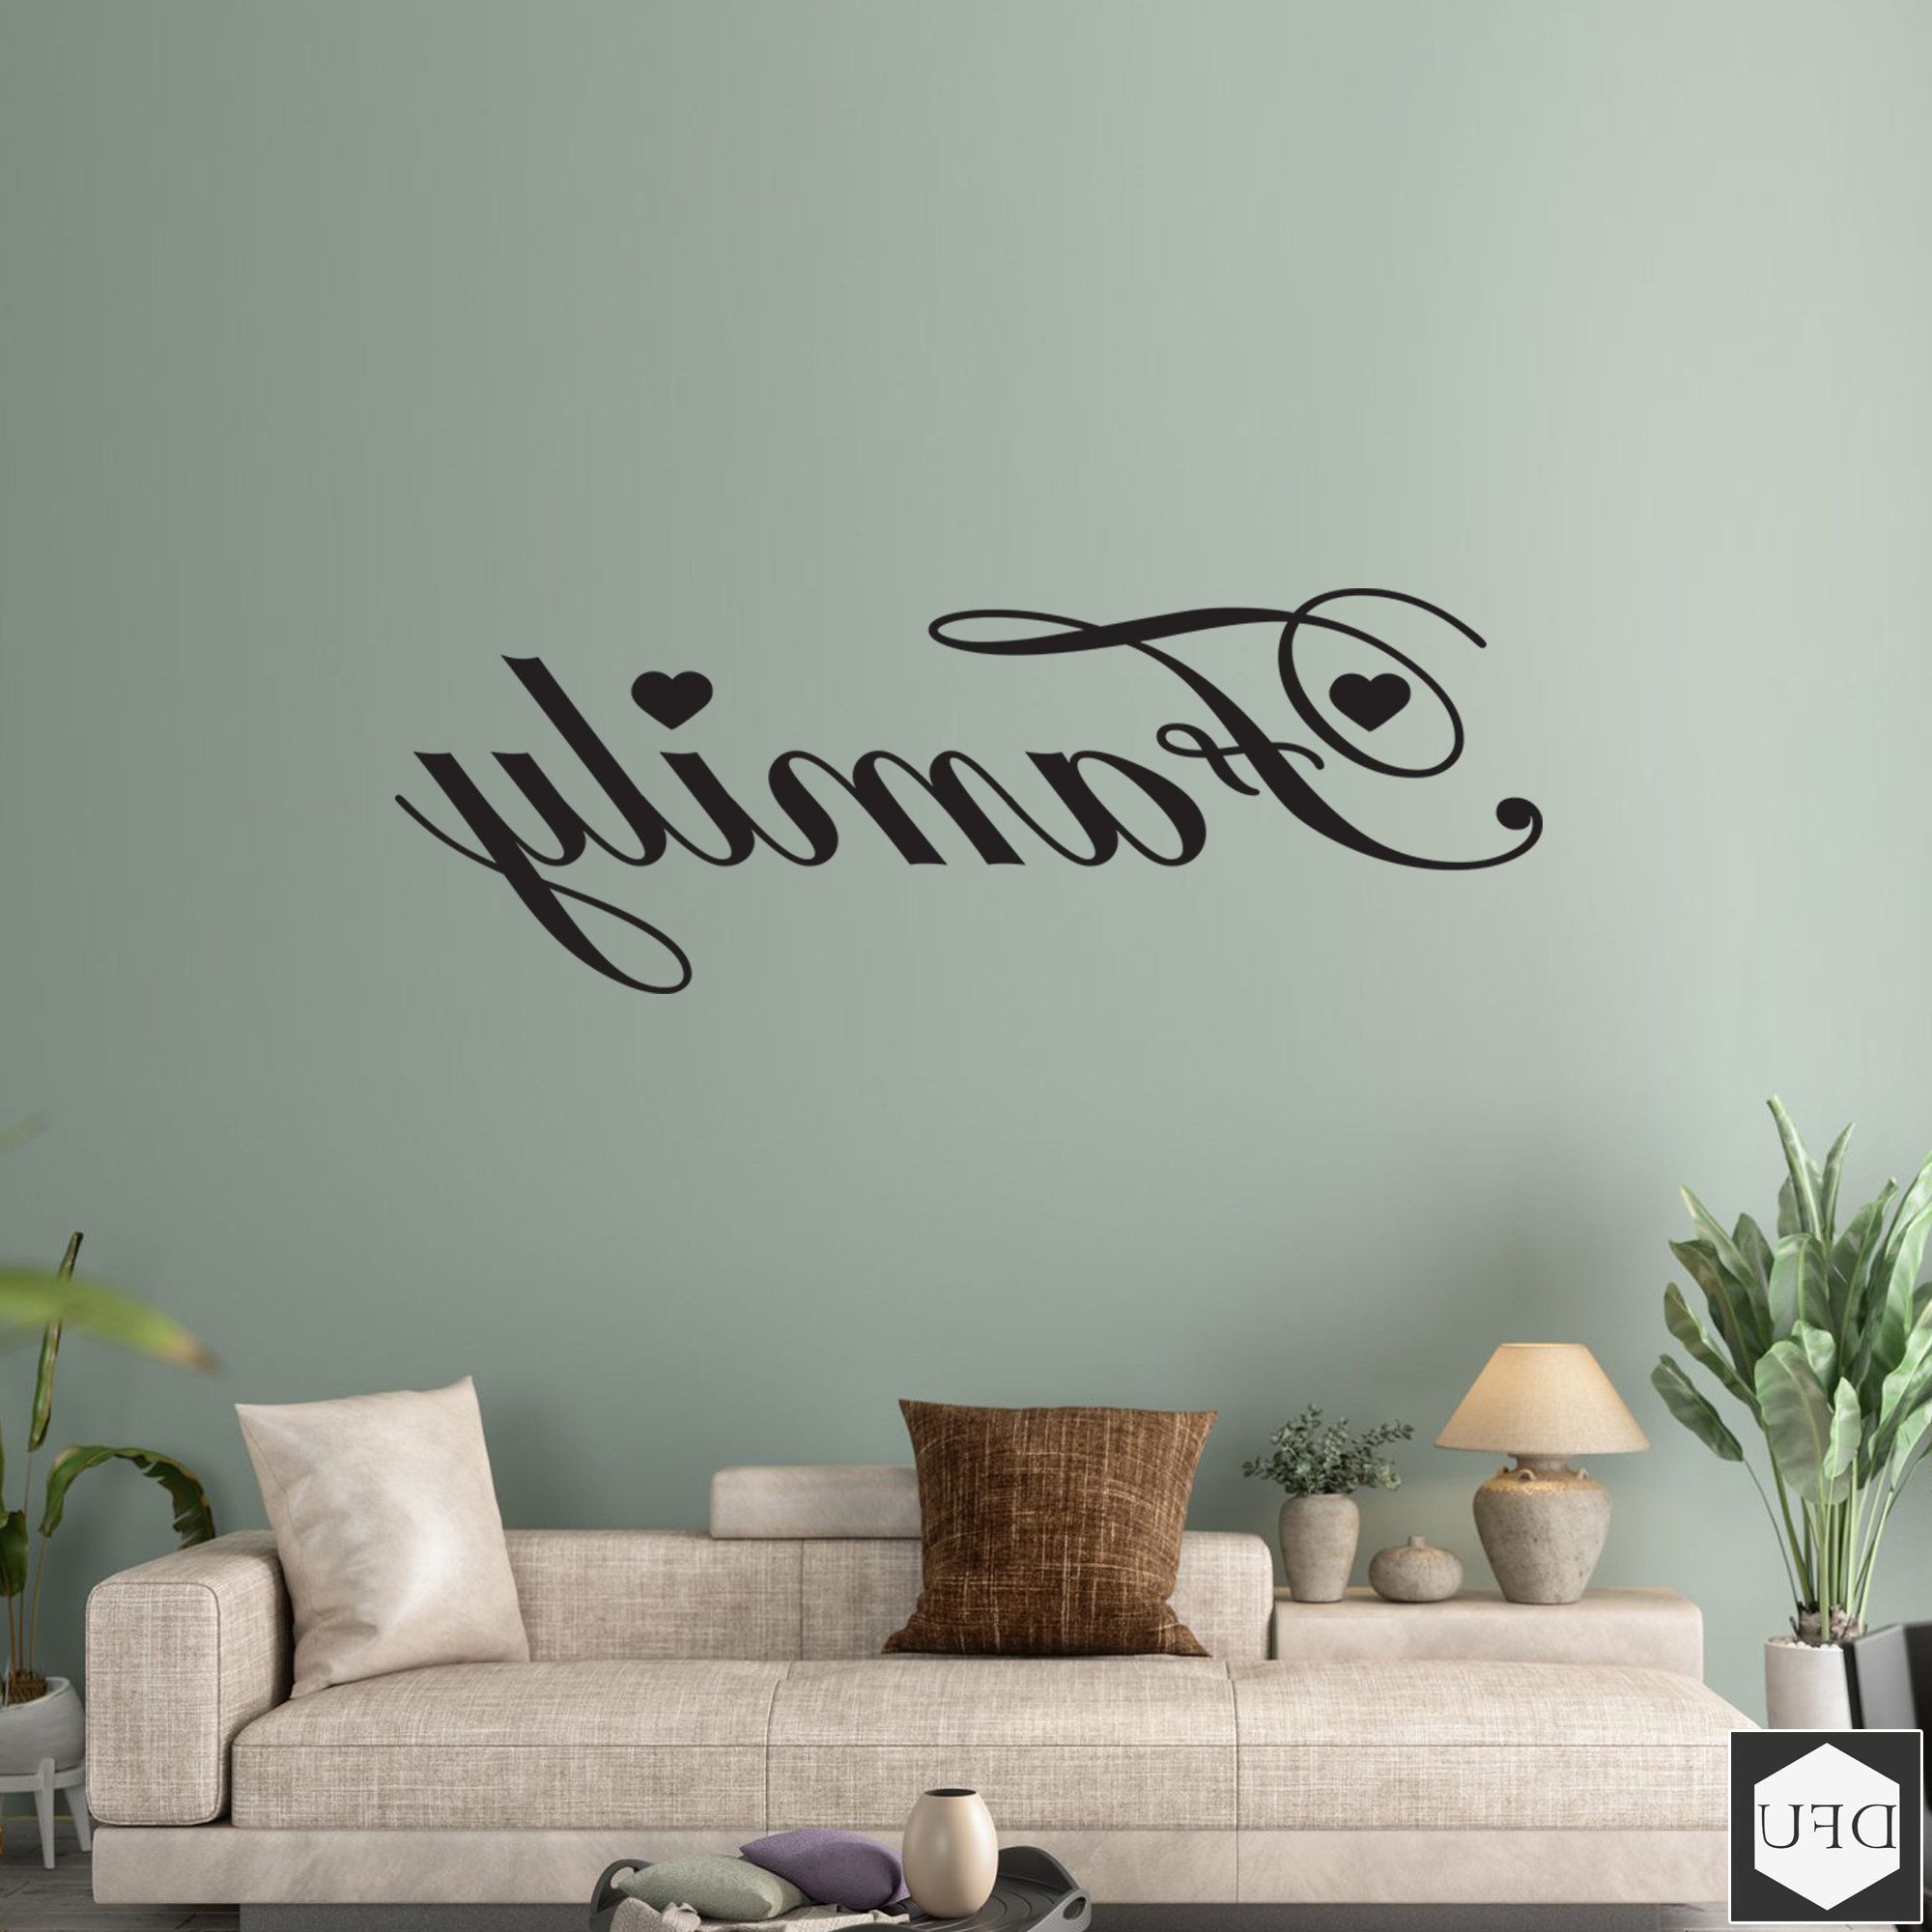 Family Word Wall Sticker Wall Art Decal Living Room – Etsy Within Well Known Family Word Wall Art (View 8 of 15)